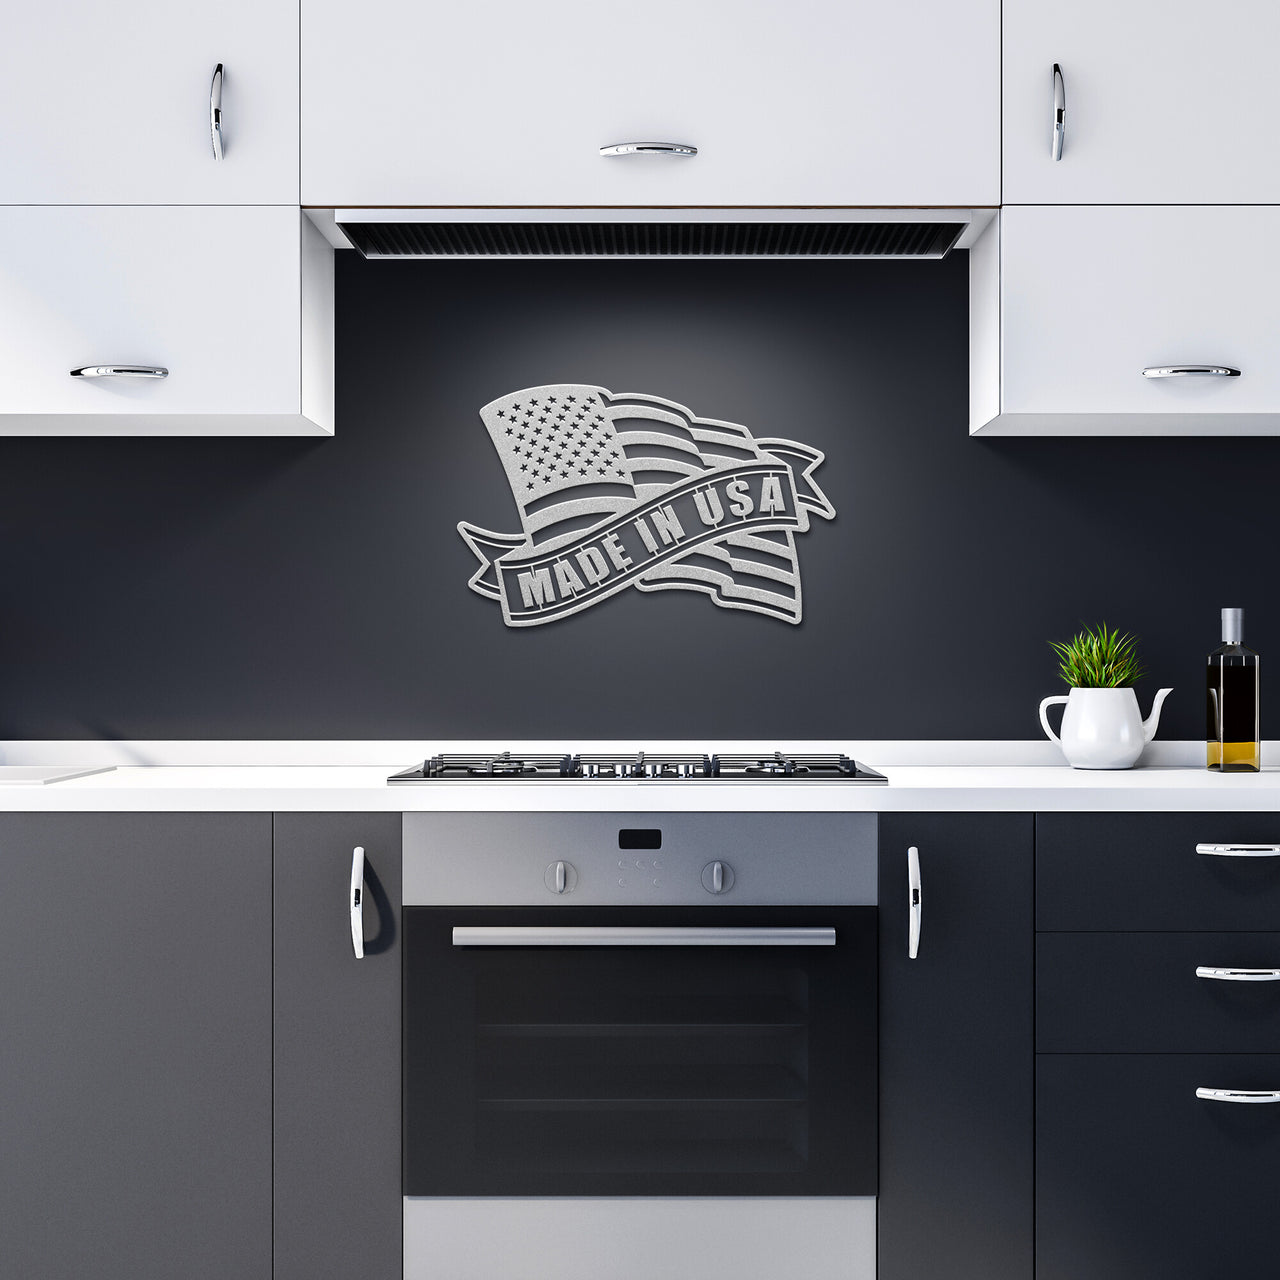 Kitchen, Wall Art of Flag with banner, Made in USA. Made of steel and powder coated.